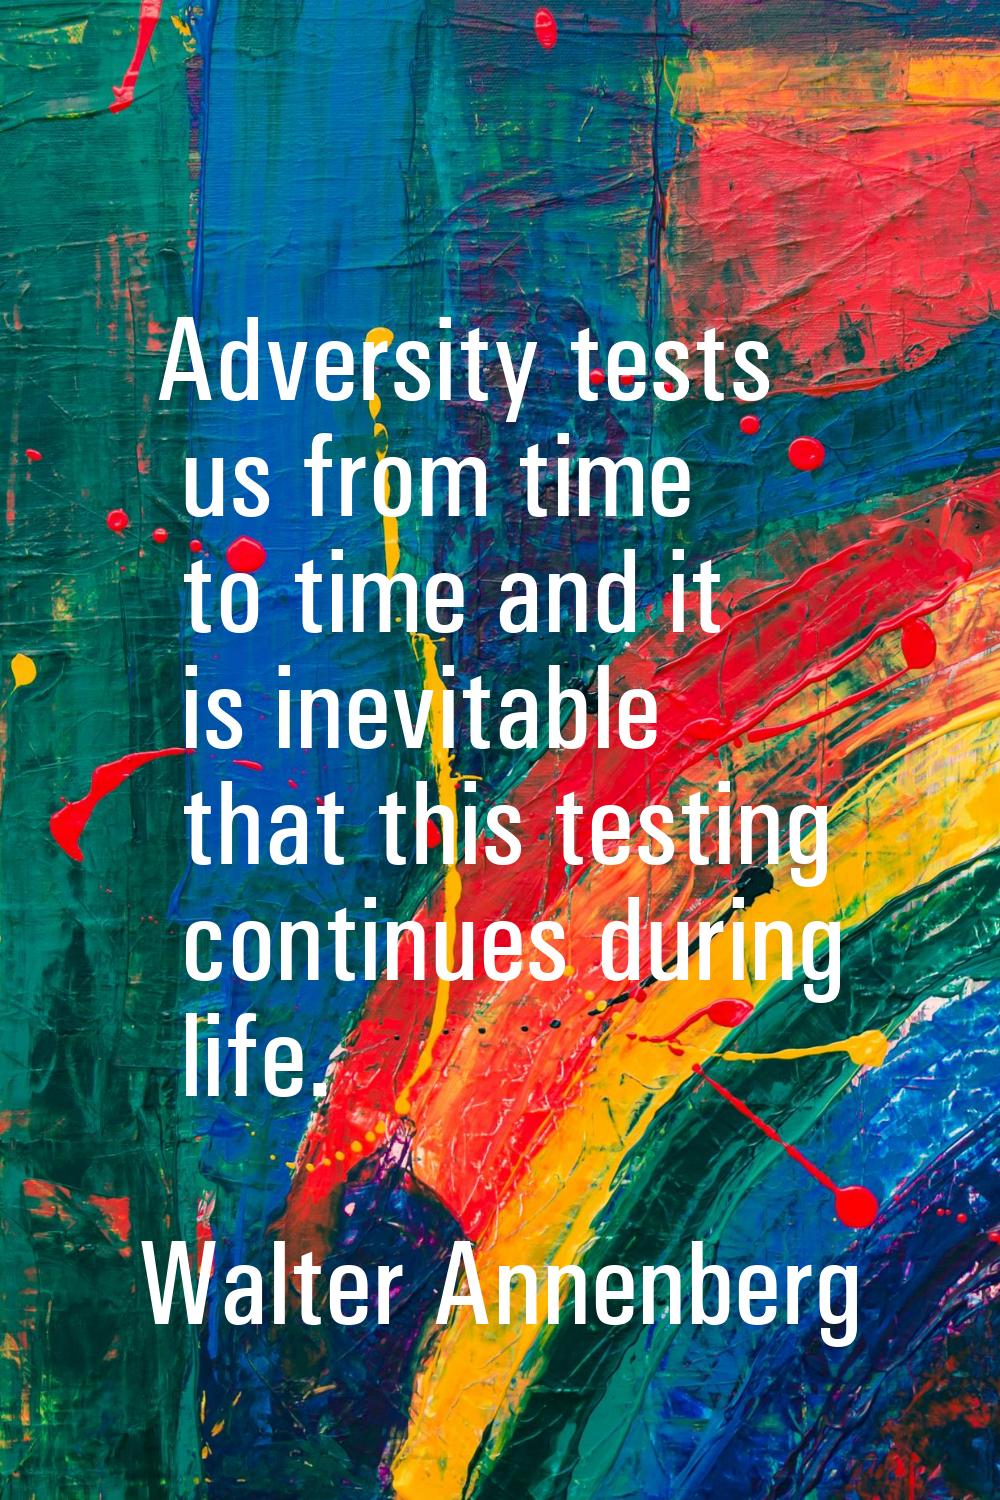 Adversity tests us from time to time and it is inevitable that this testing continues during life.